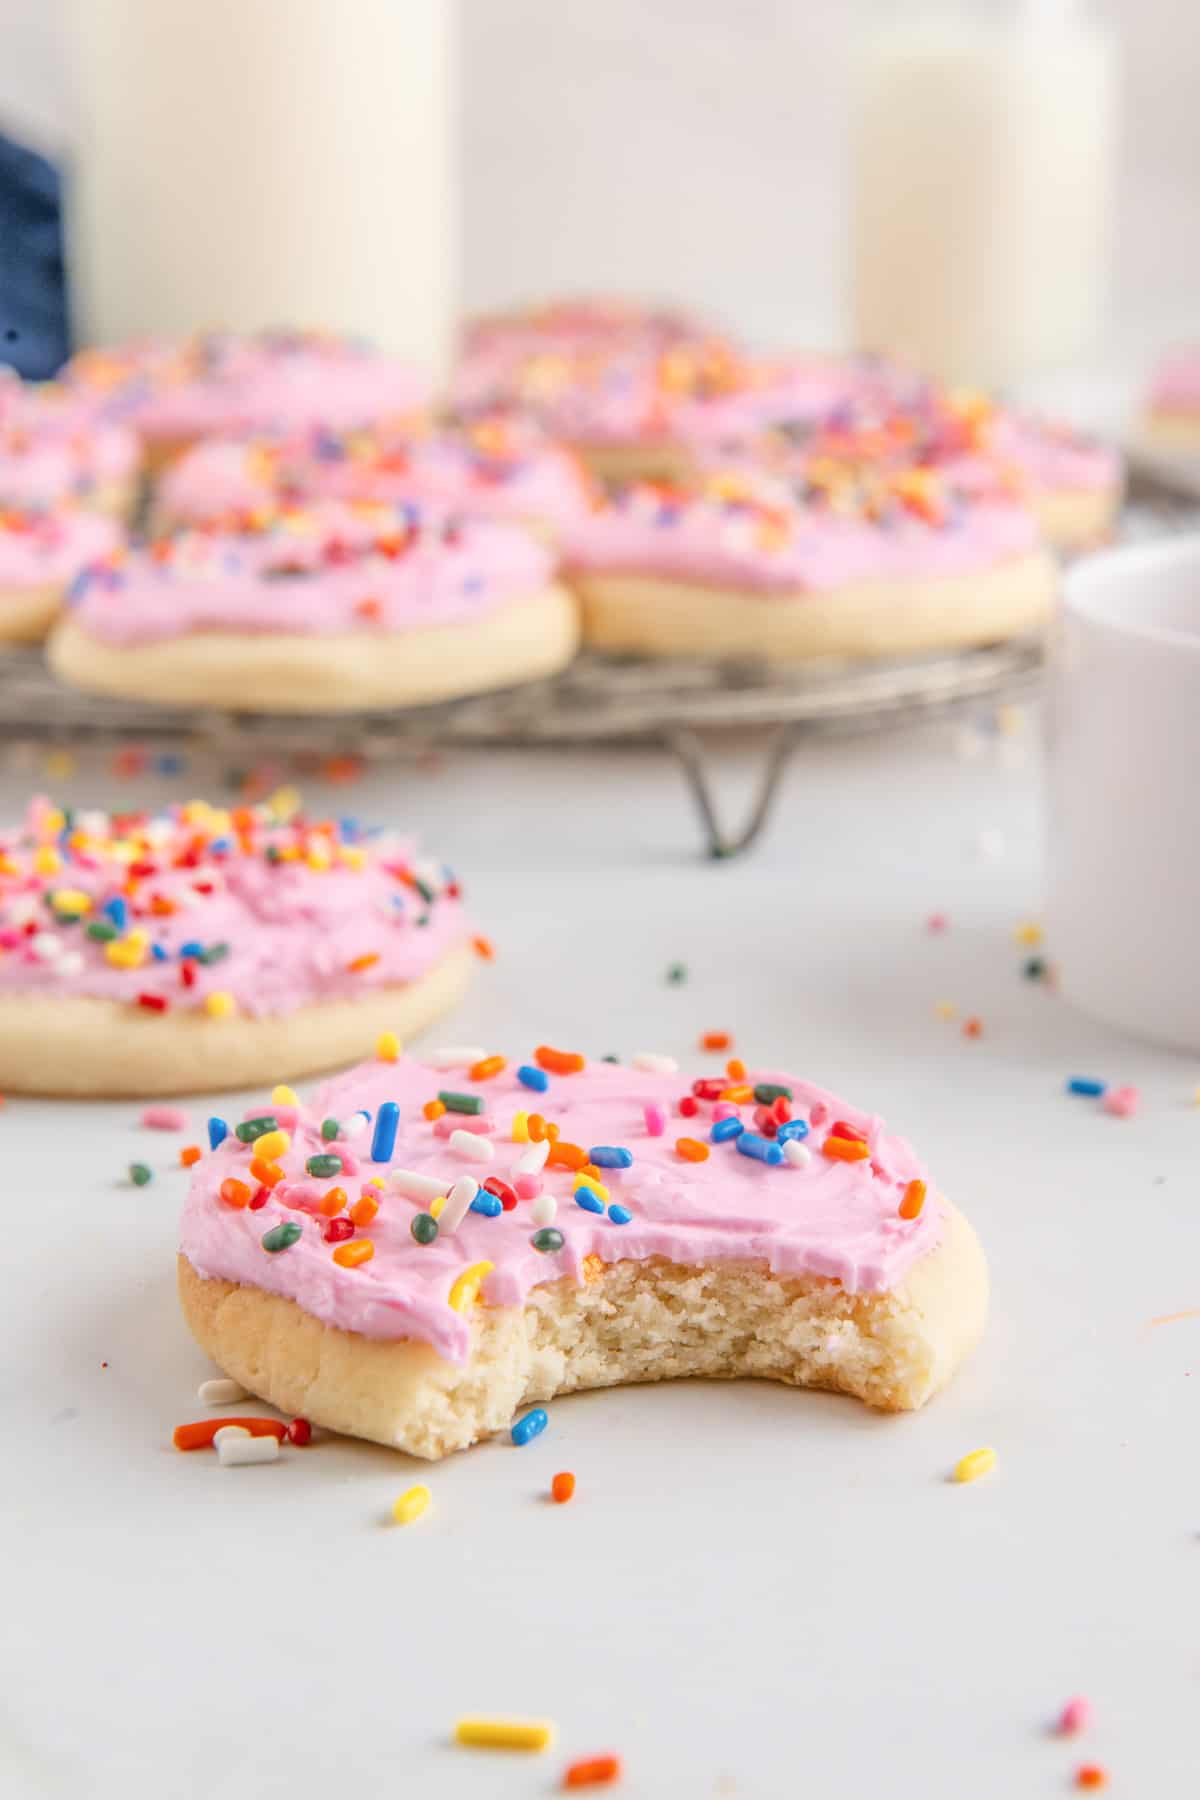 A Lofthouse sugar cookie with pink frosting and rainbow sprinkles that has a bite taken out of it with more cookies in the background.